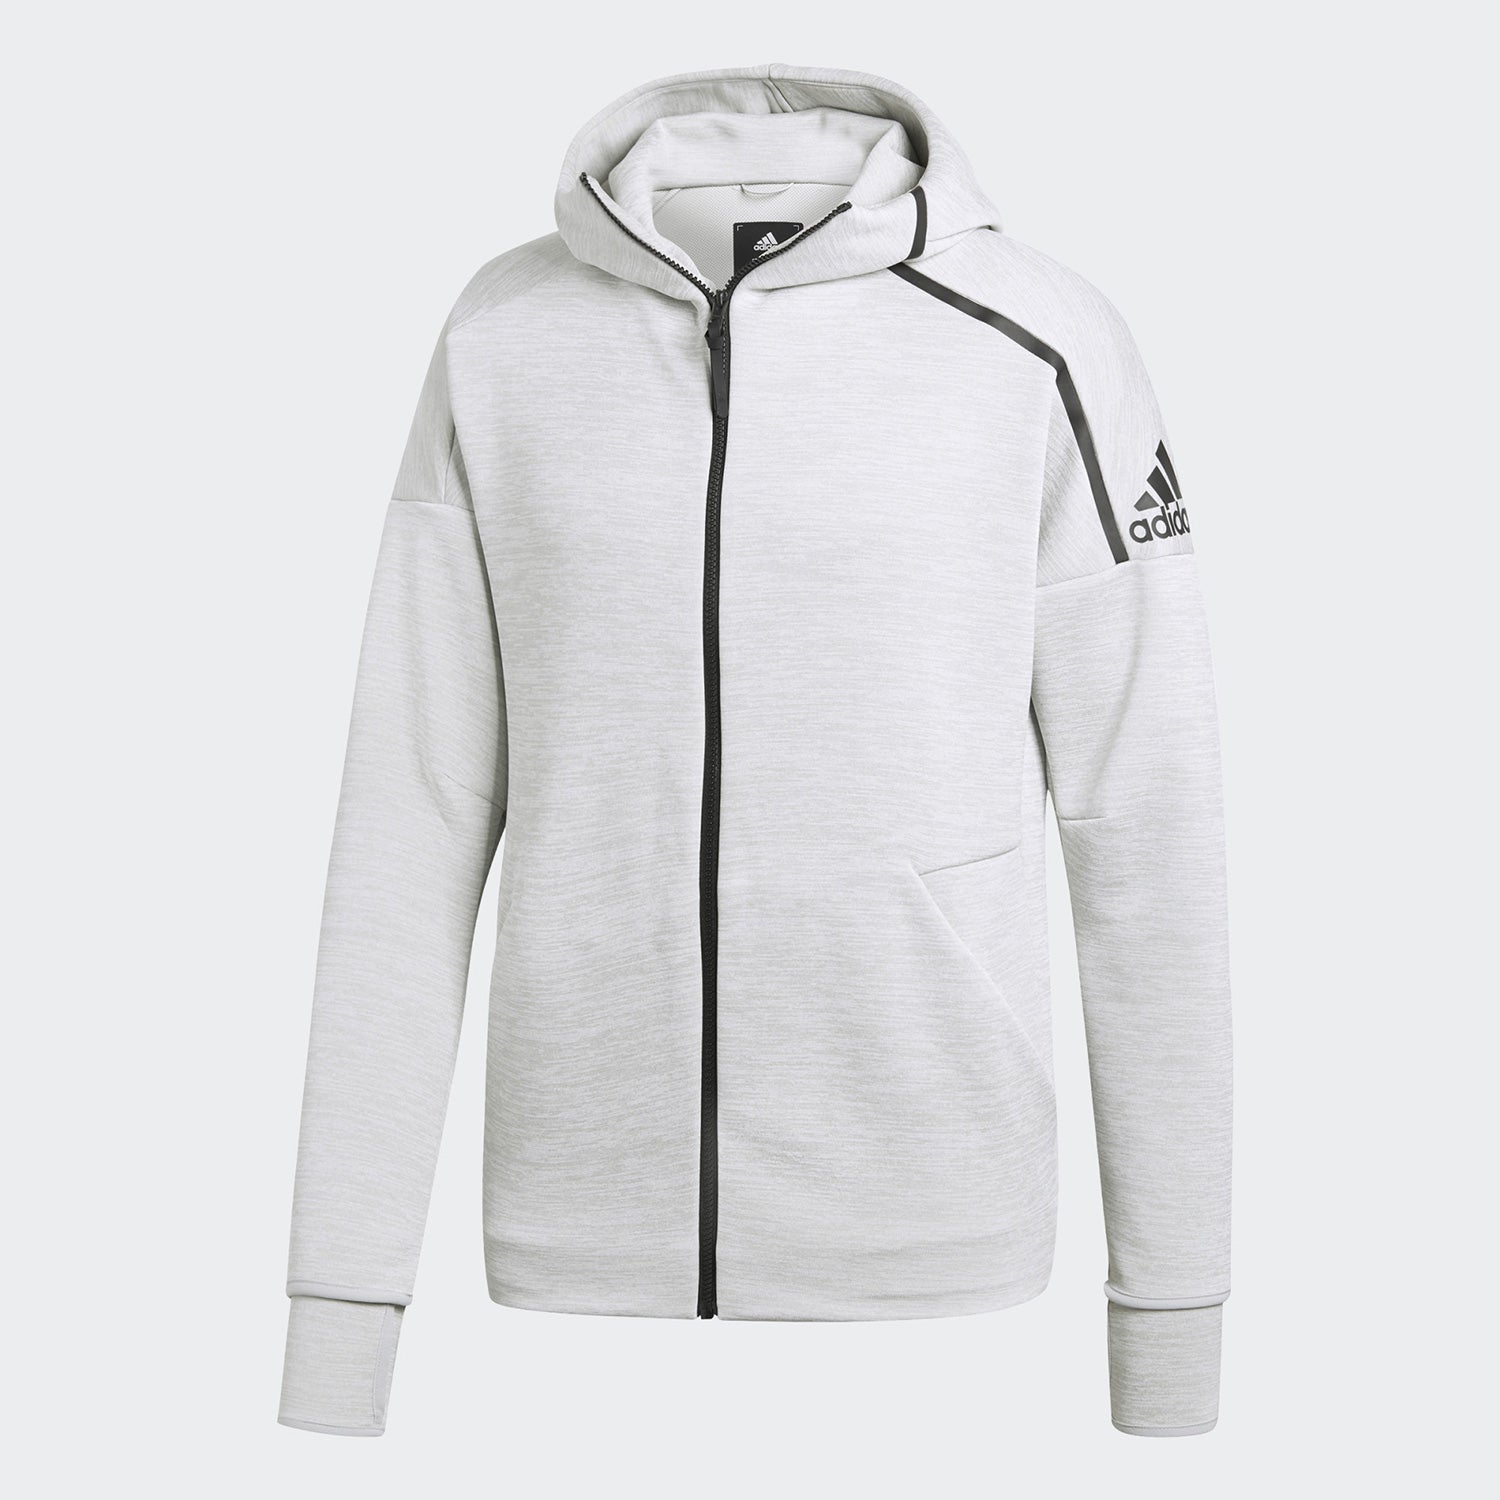 zne hoodie fast release